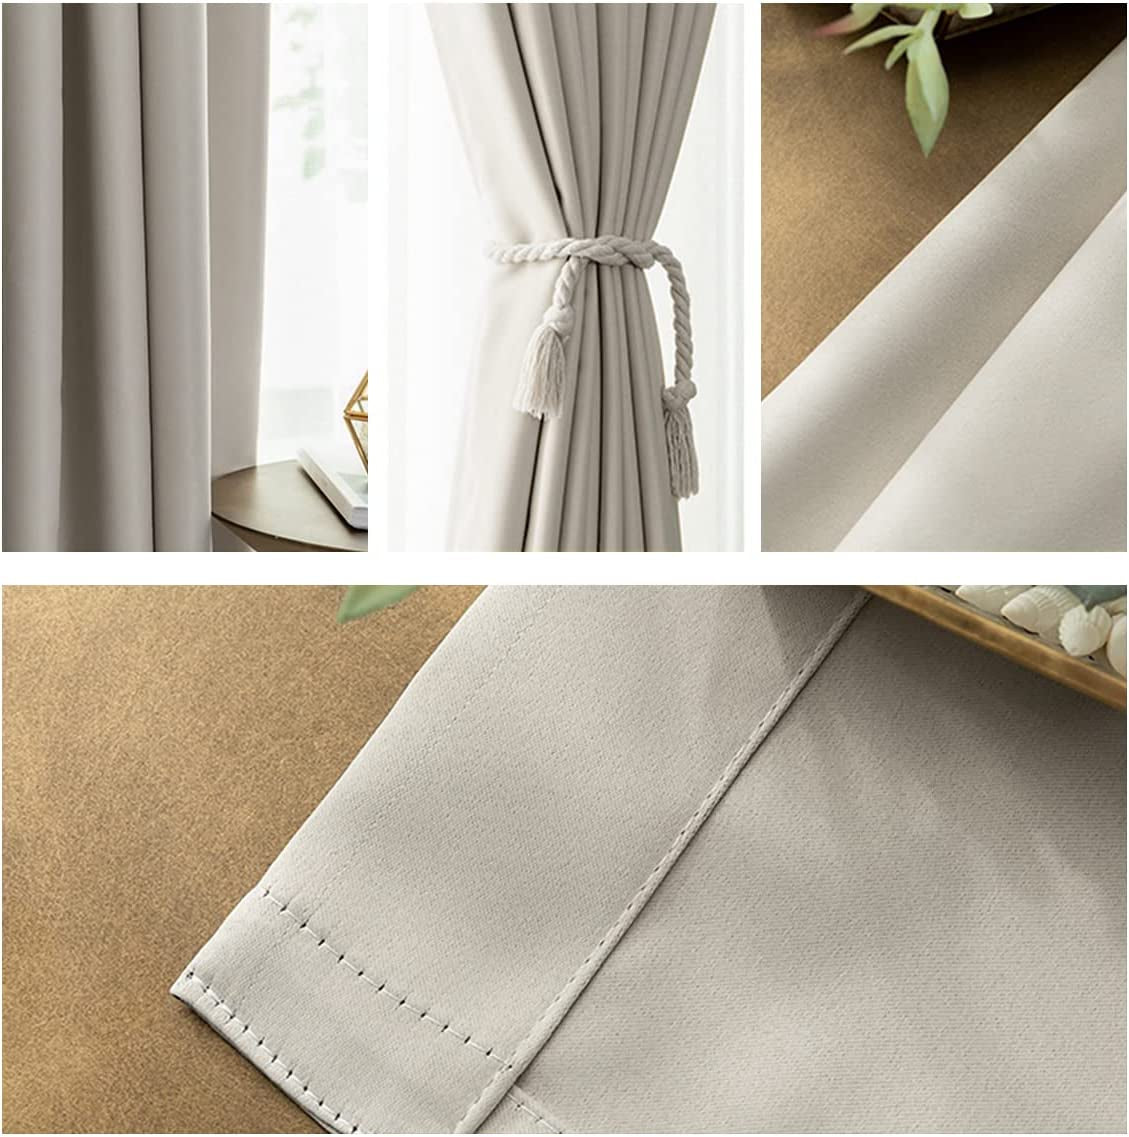 IYUEGO Pinch Pleat Solid Thermal Insulated 95% Blackout Patio Door Curtain Panel Drape for Traverse Rod and Track, Beige 52" W X 96" L (One Panel)  I Love Curtains   